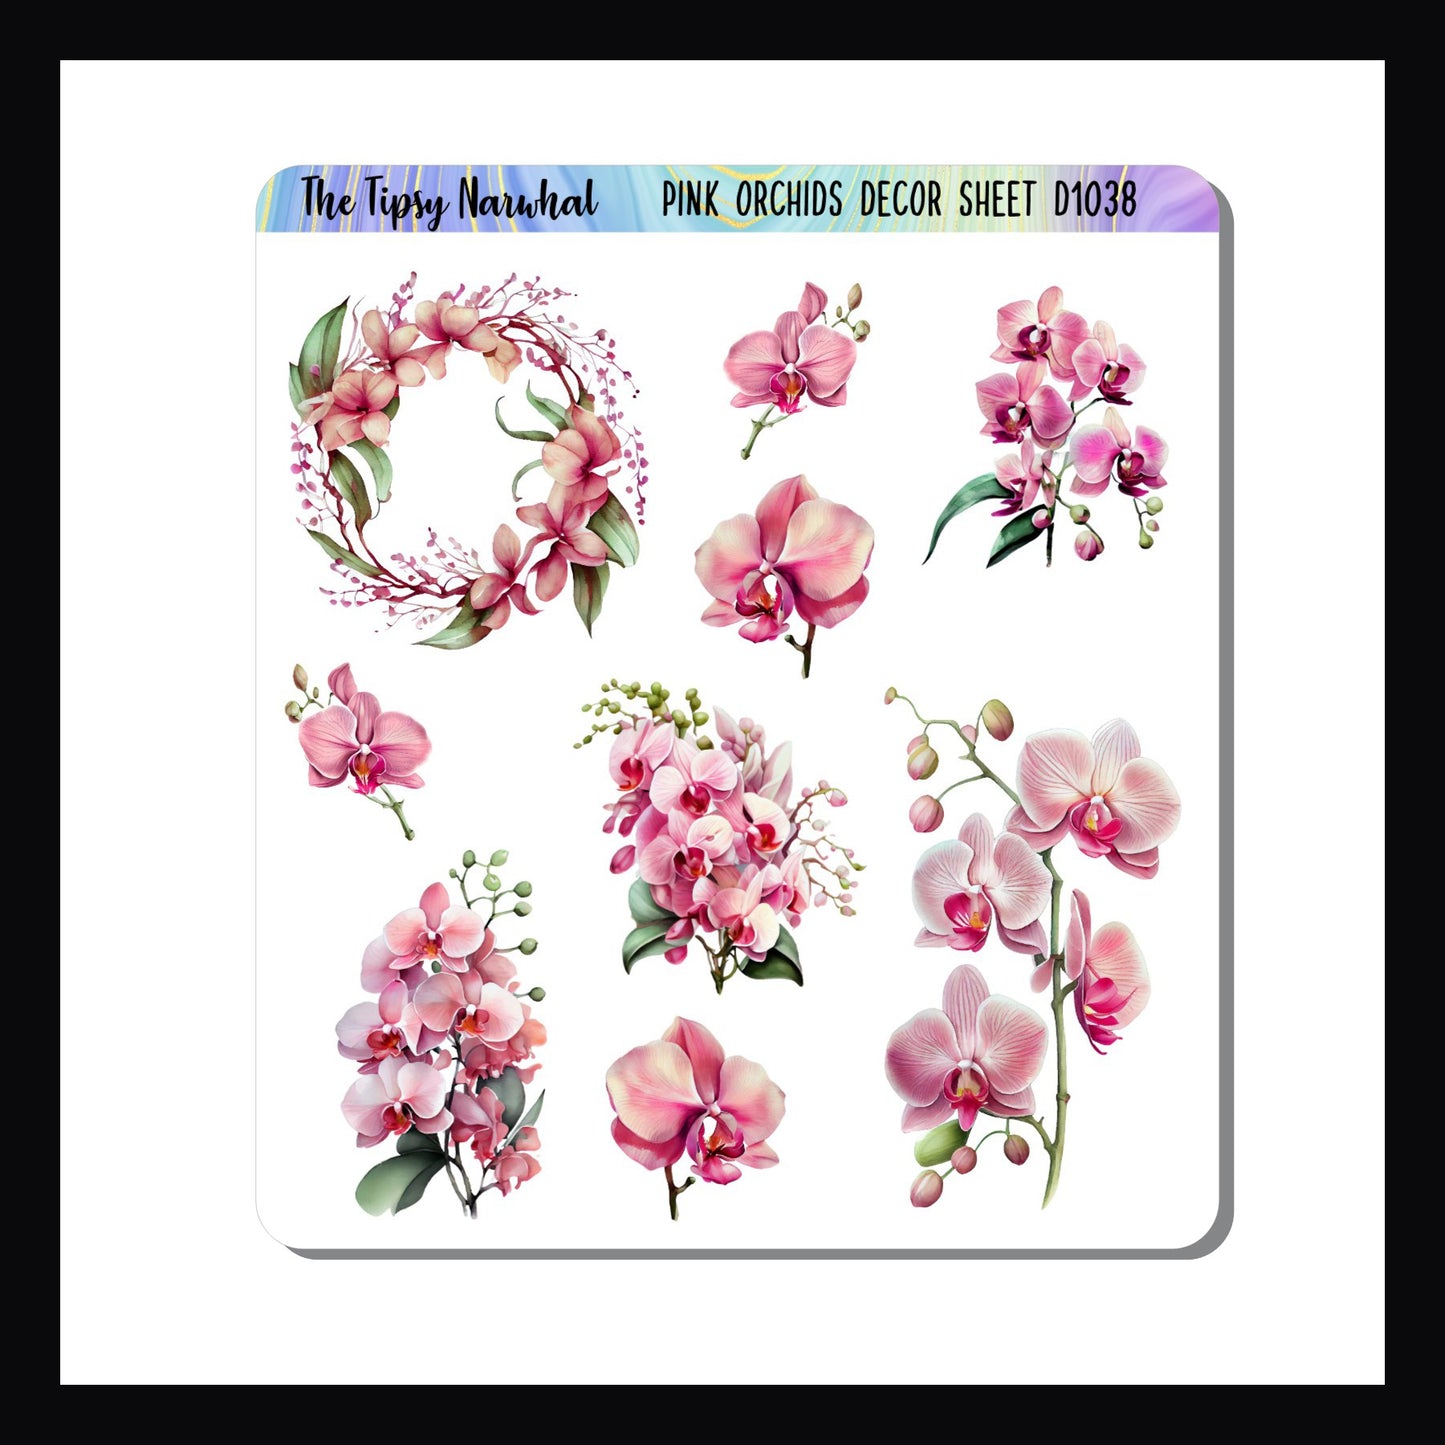 The Pink Orchids Decor Sheet features multiple stickers of various pink orchids.  The 9 stickers vary in size and composition. 